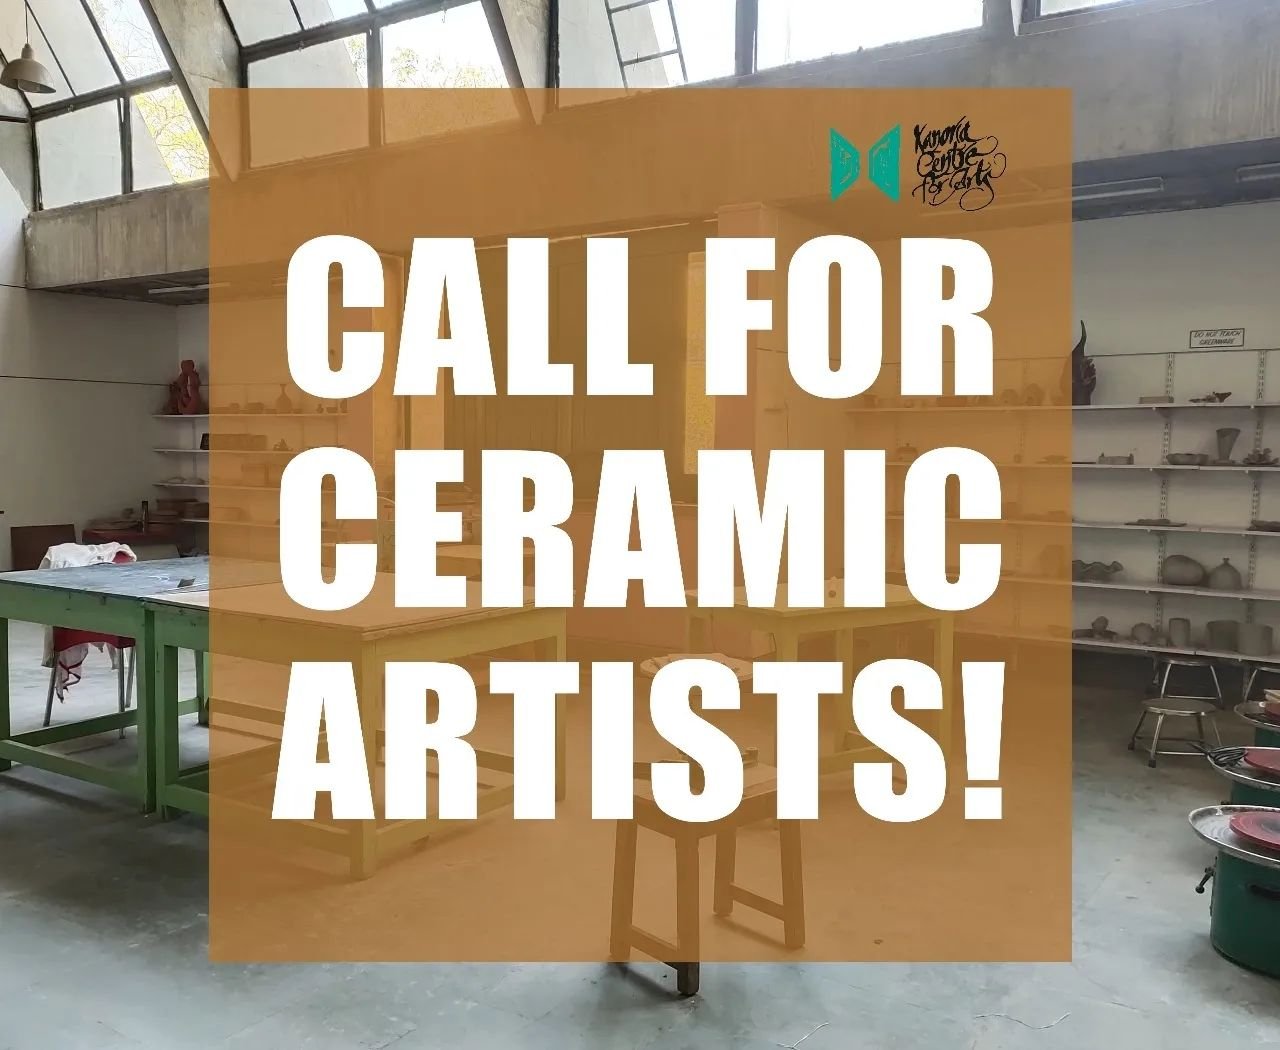 🏺CALL FOR CERAMIC ARTISTS!🏺

Following the proceeds from the Raffle Draw that took place in KCA Ceramics Festival last year, we are pleased to announce our SPONSORSHIP of one ceramic artist for 3 months! 

Kanoria Centre for Arts has a Ceramic Stud